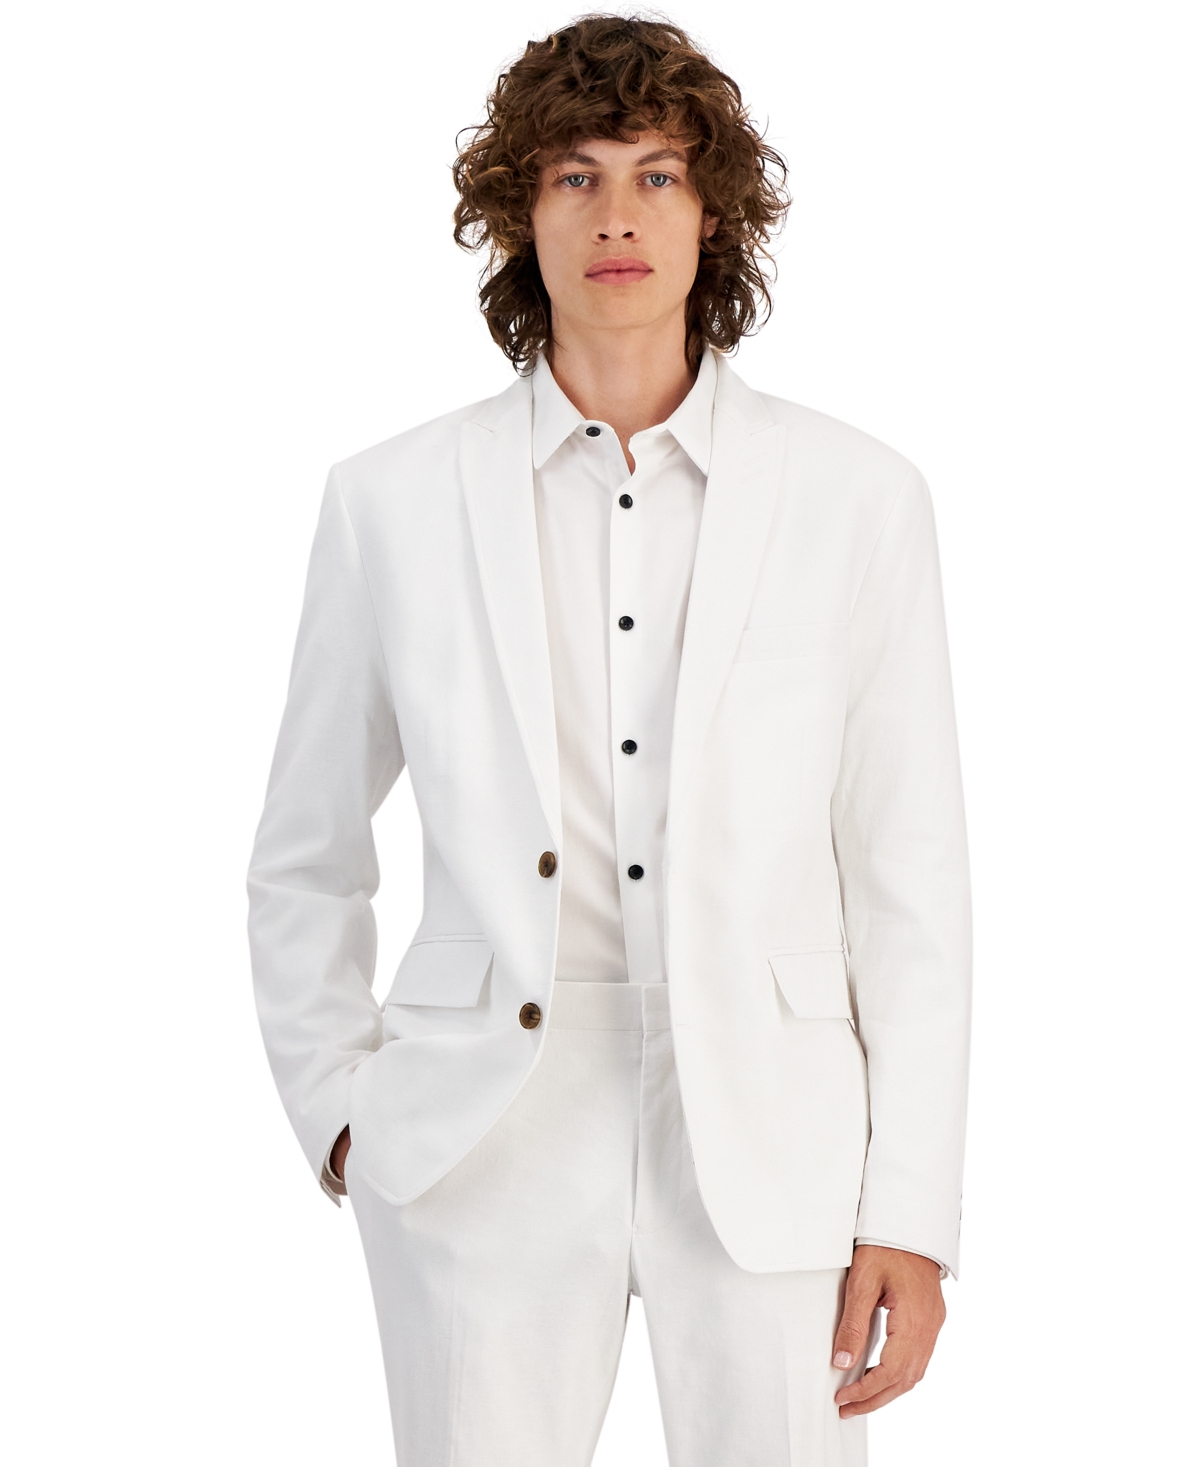 Men's Slim-Fit Stretch Linen Blend Suit Jacket, Created for Macy's - Bright White